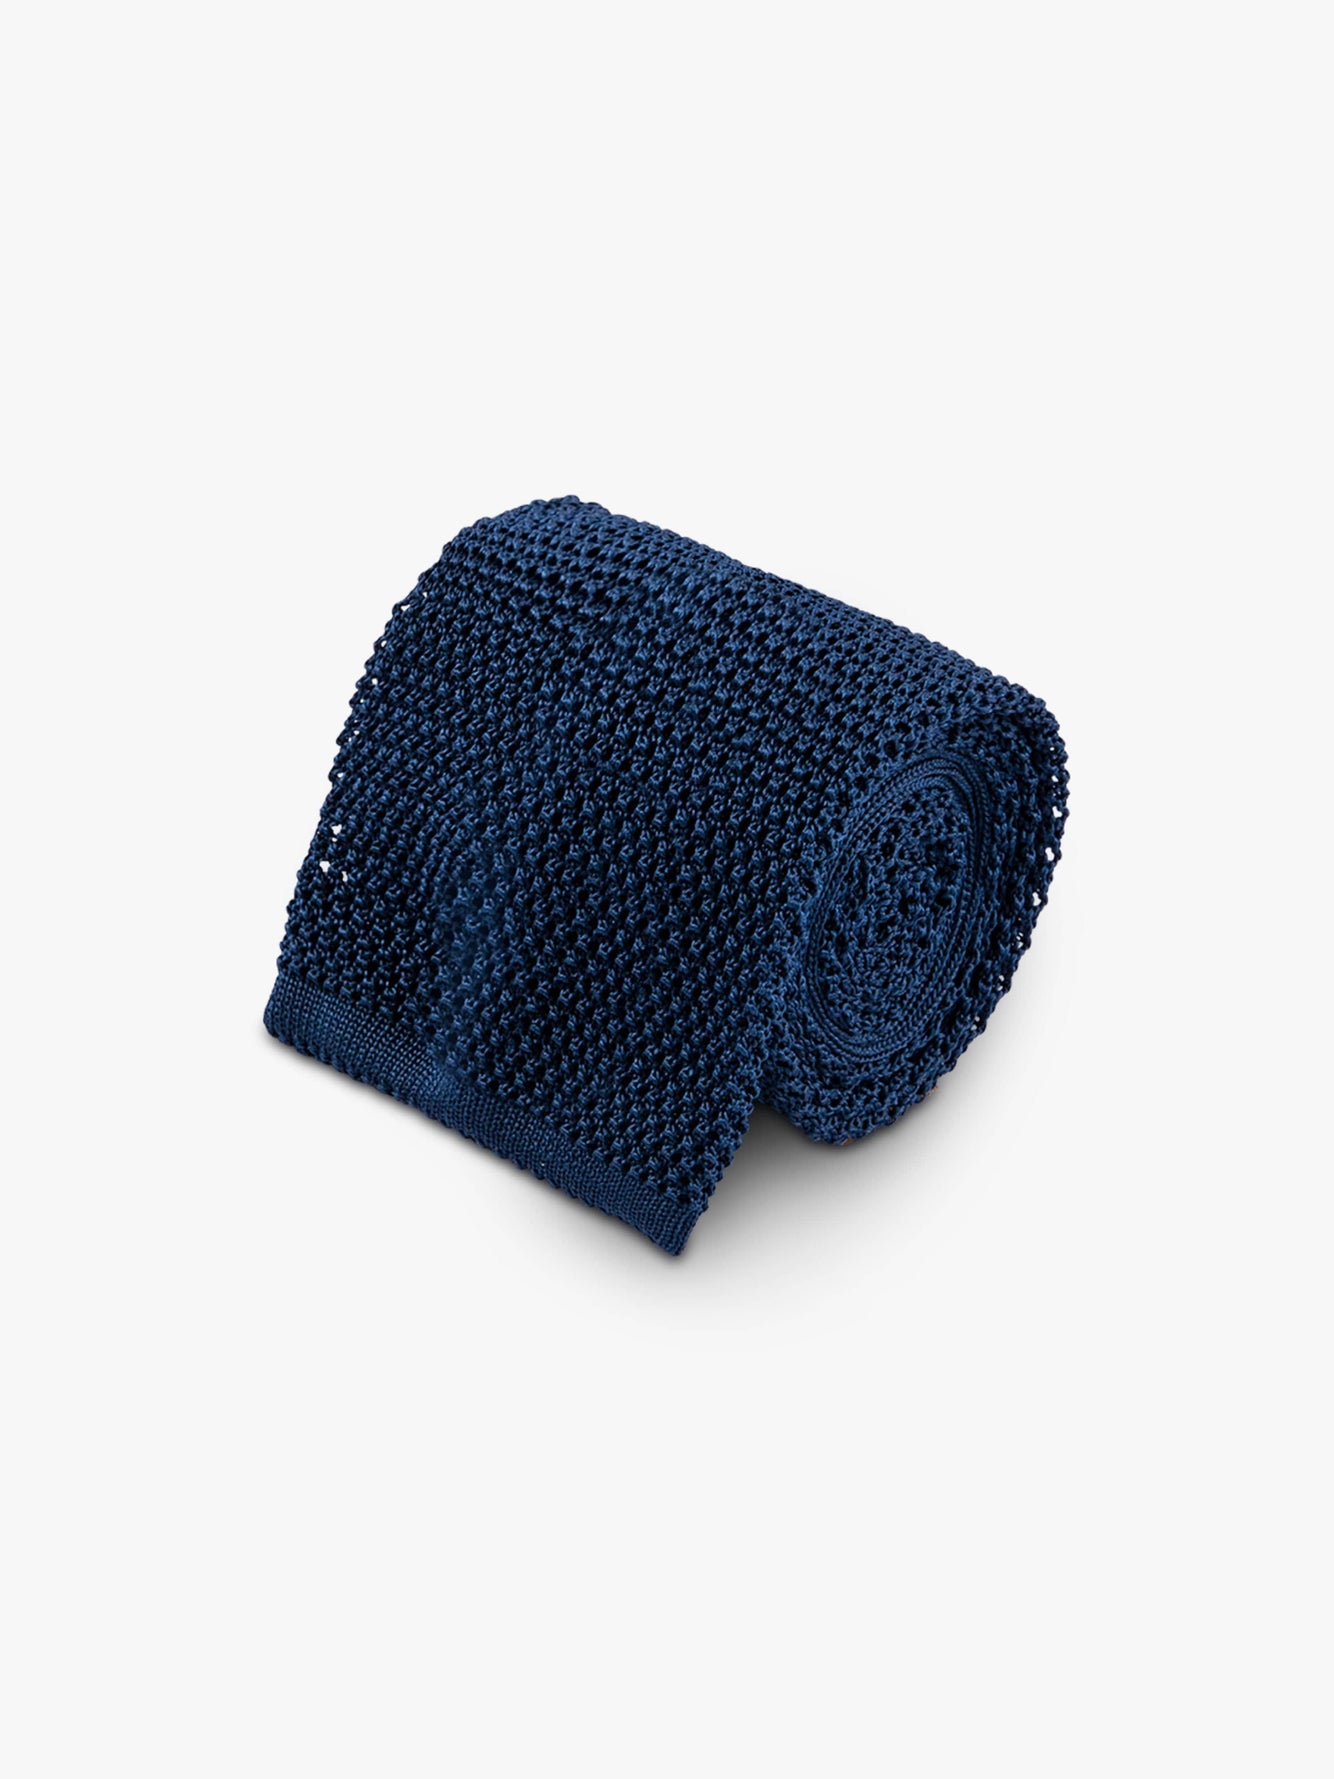 Navy Knitted Tie - Grand Le Mar